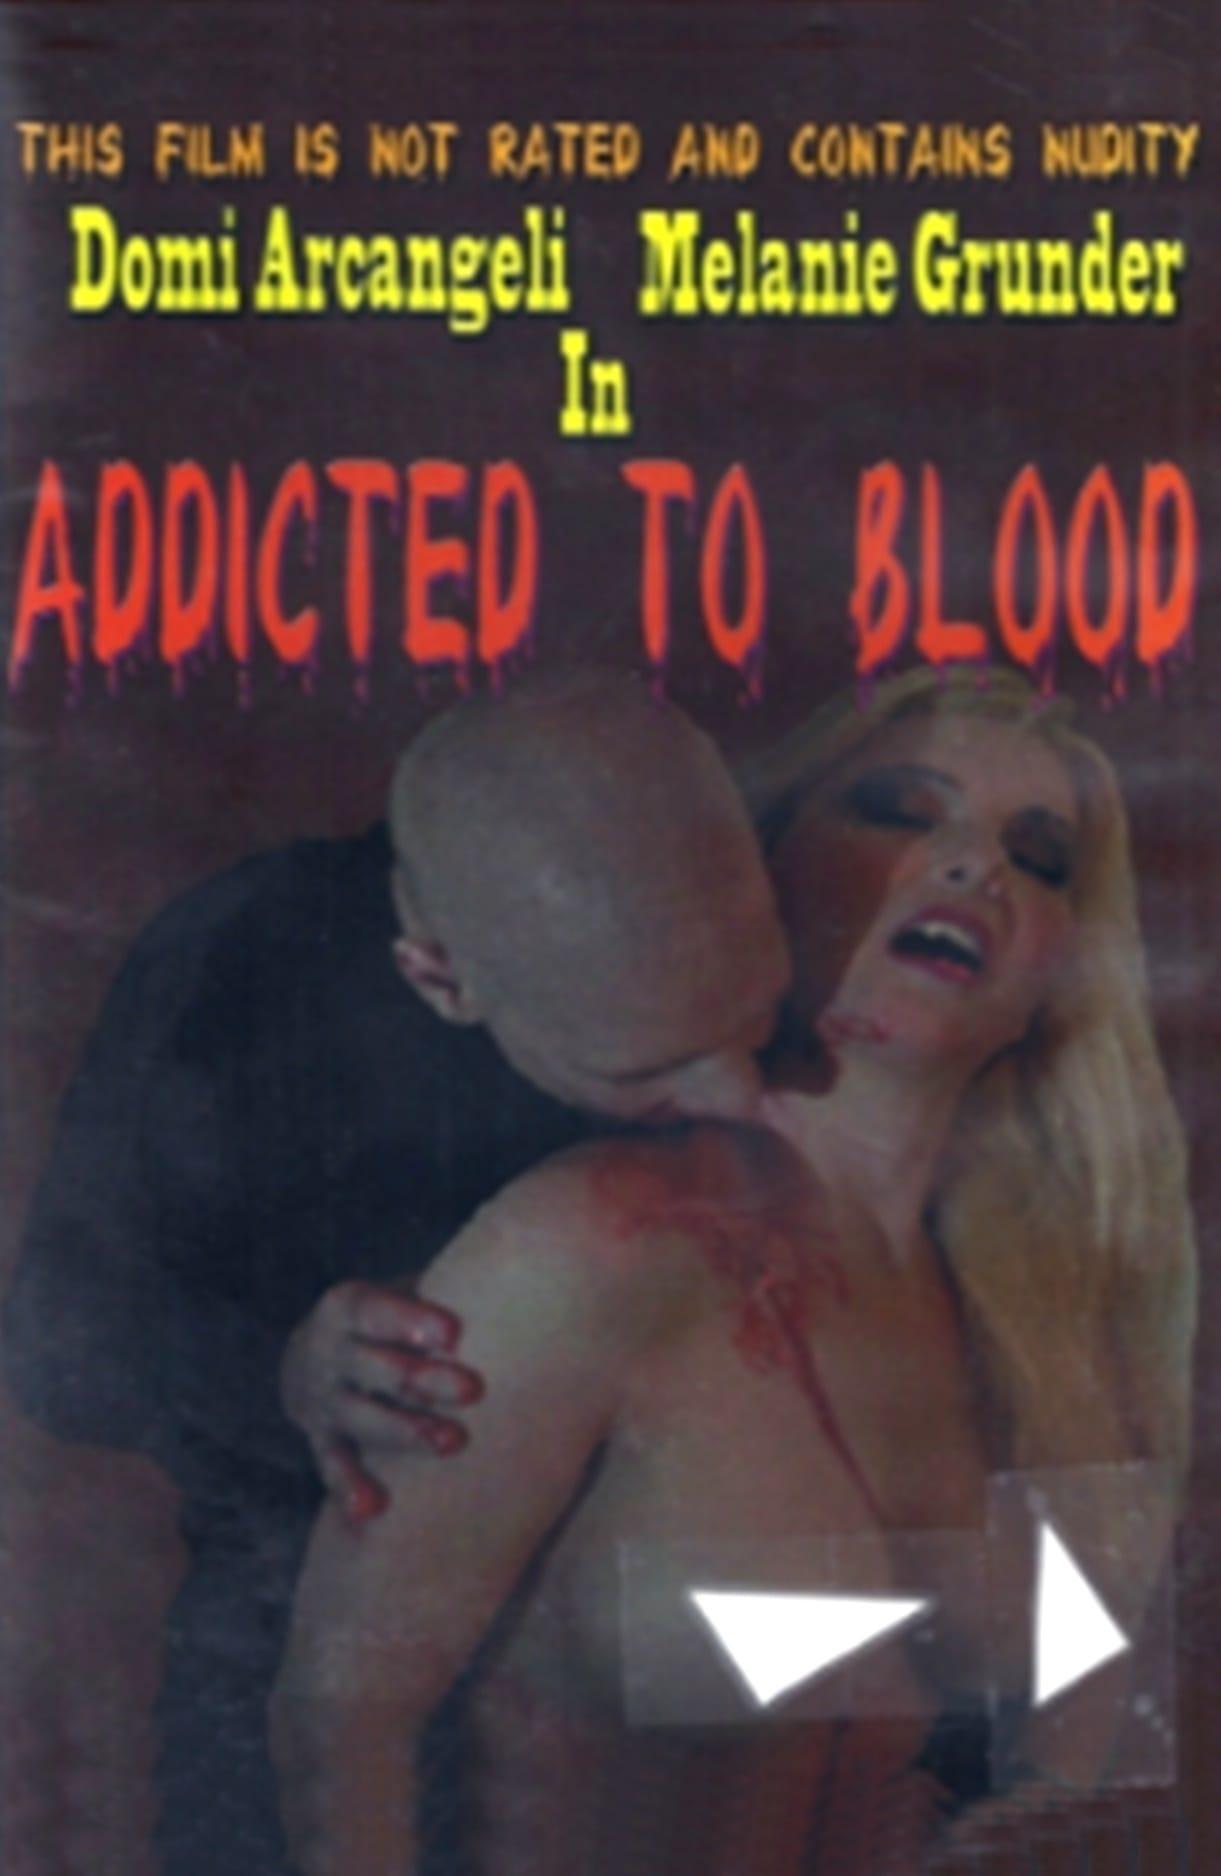 Addicted to Blood poster